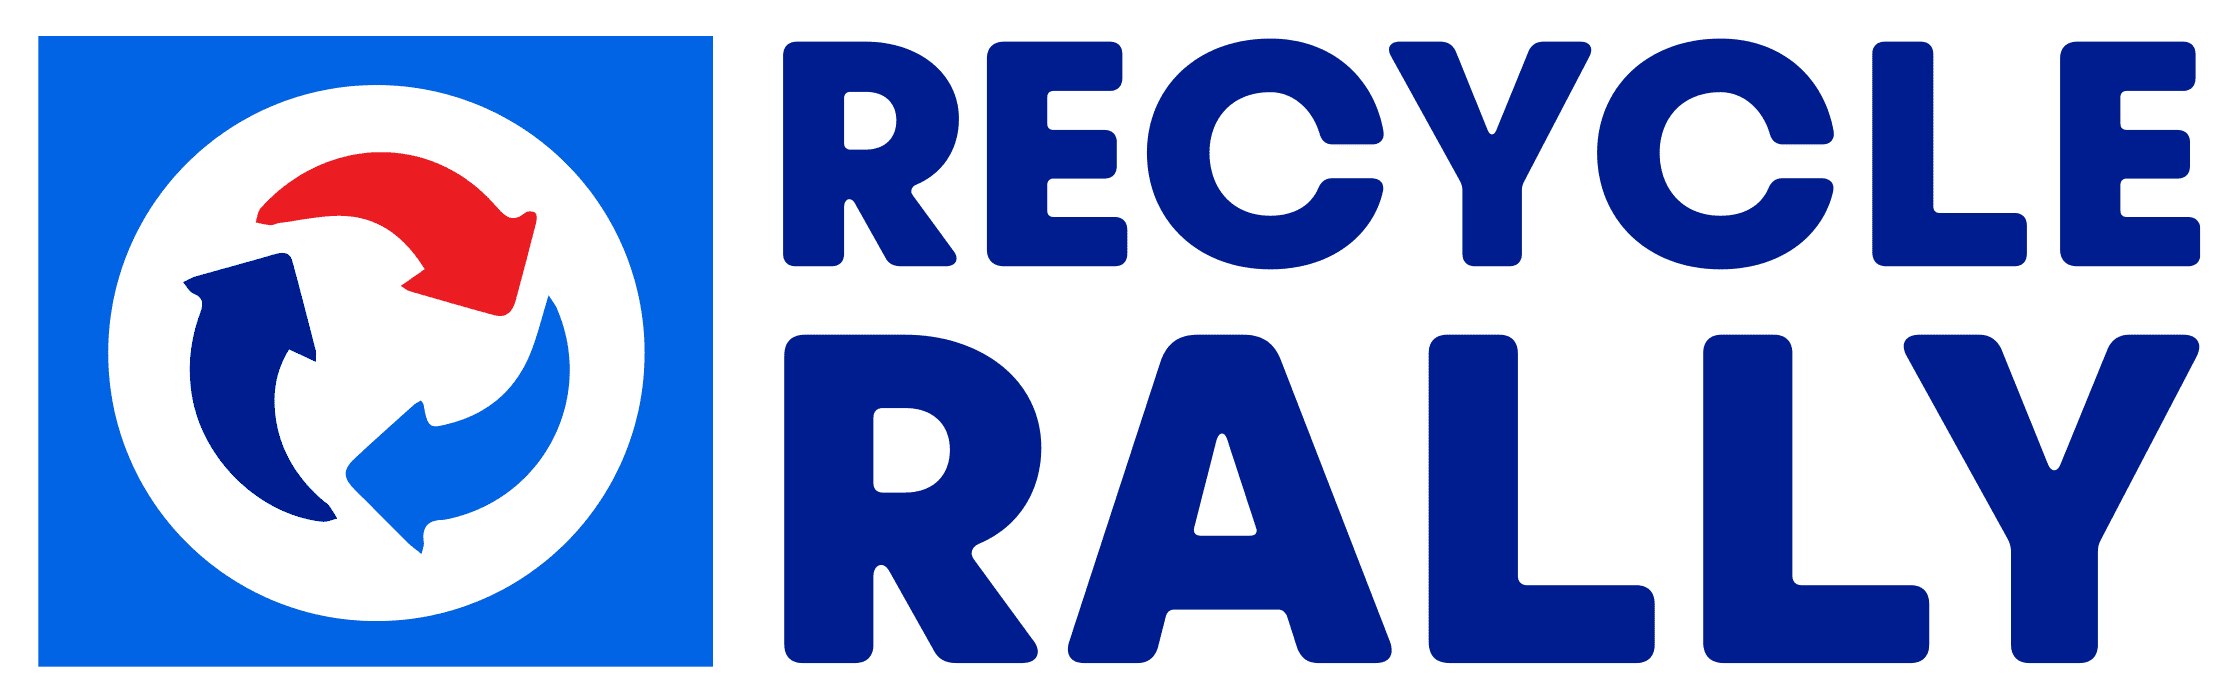 Recycle Rally Logo